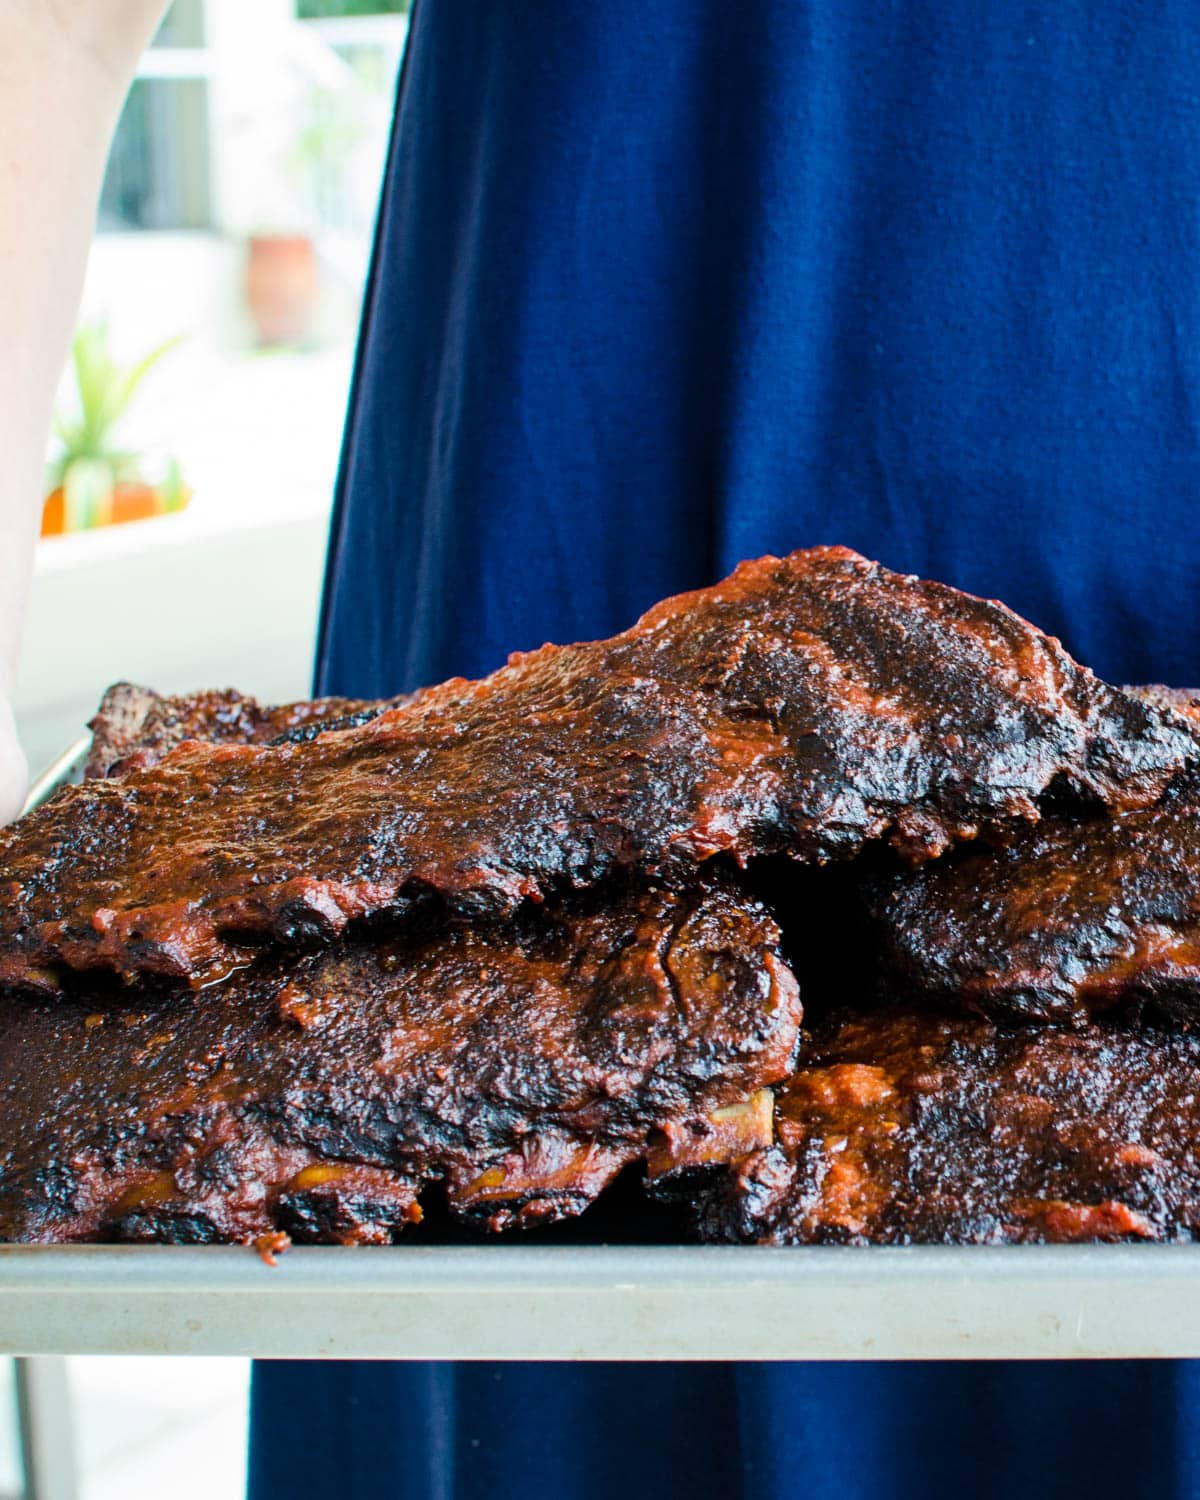 A platter of hickory smoked ribs.